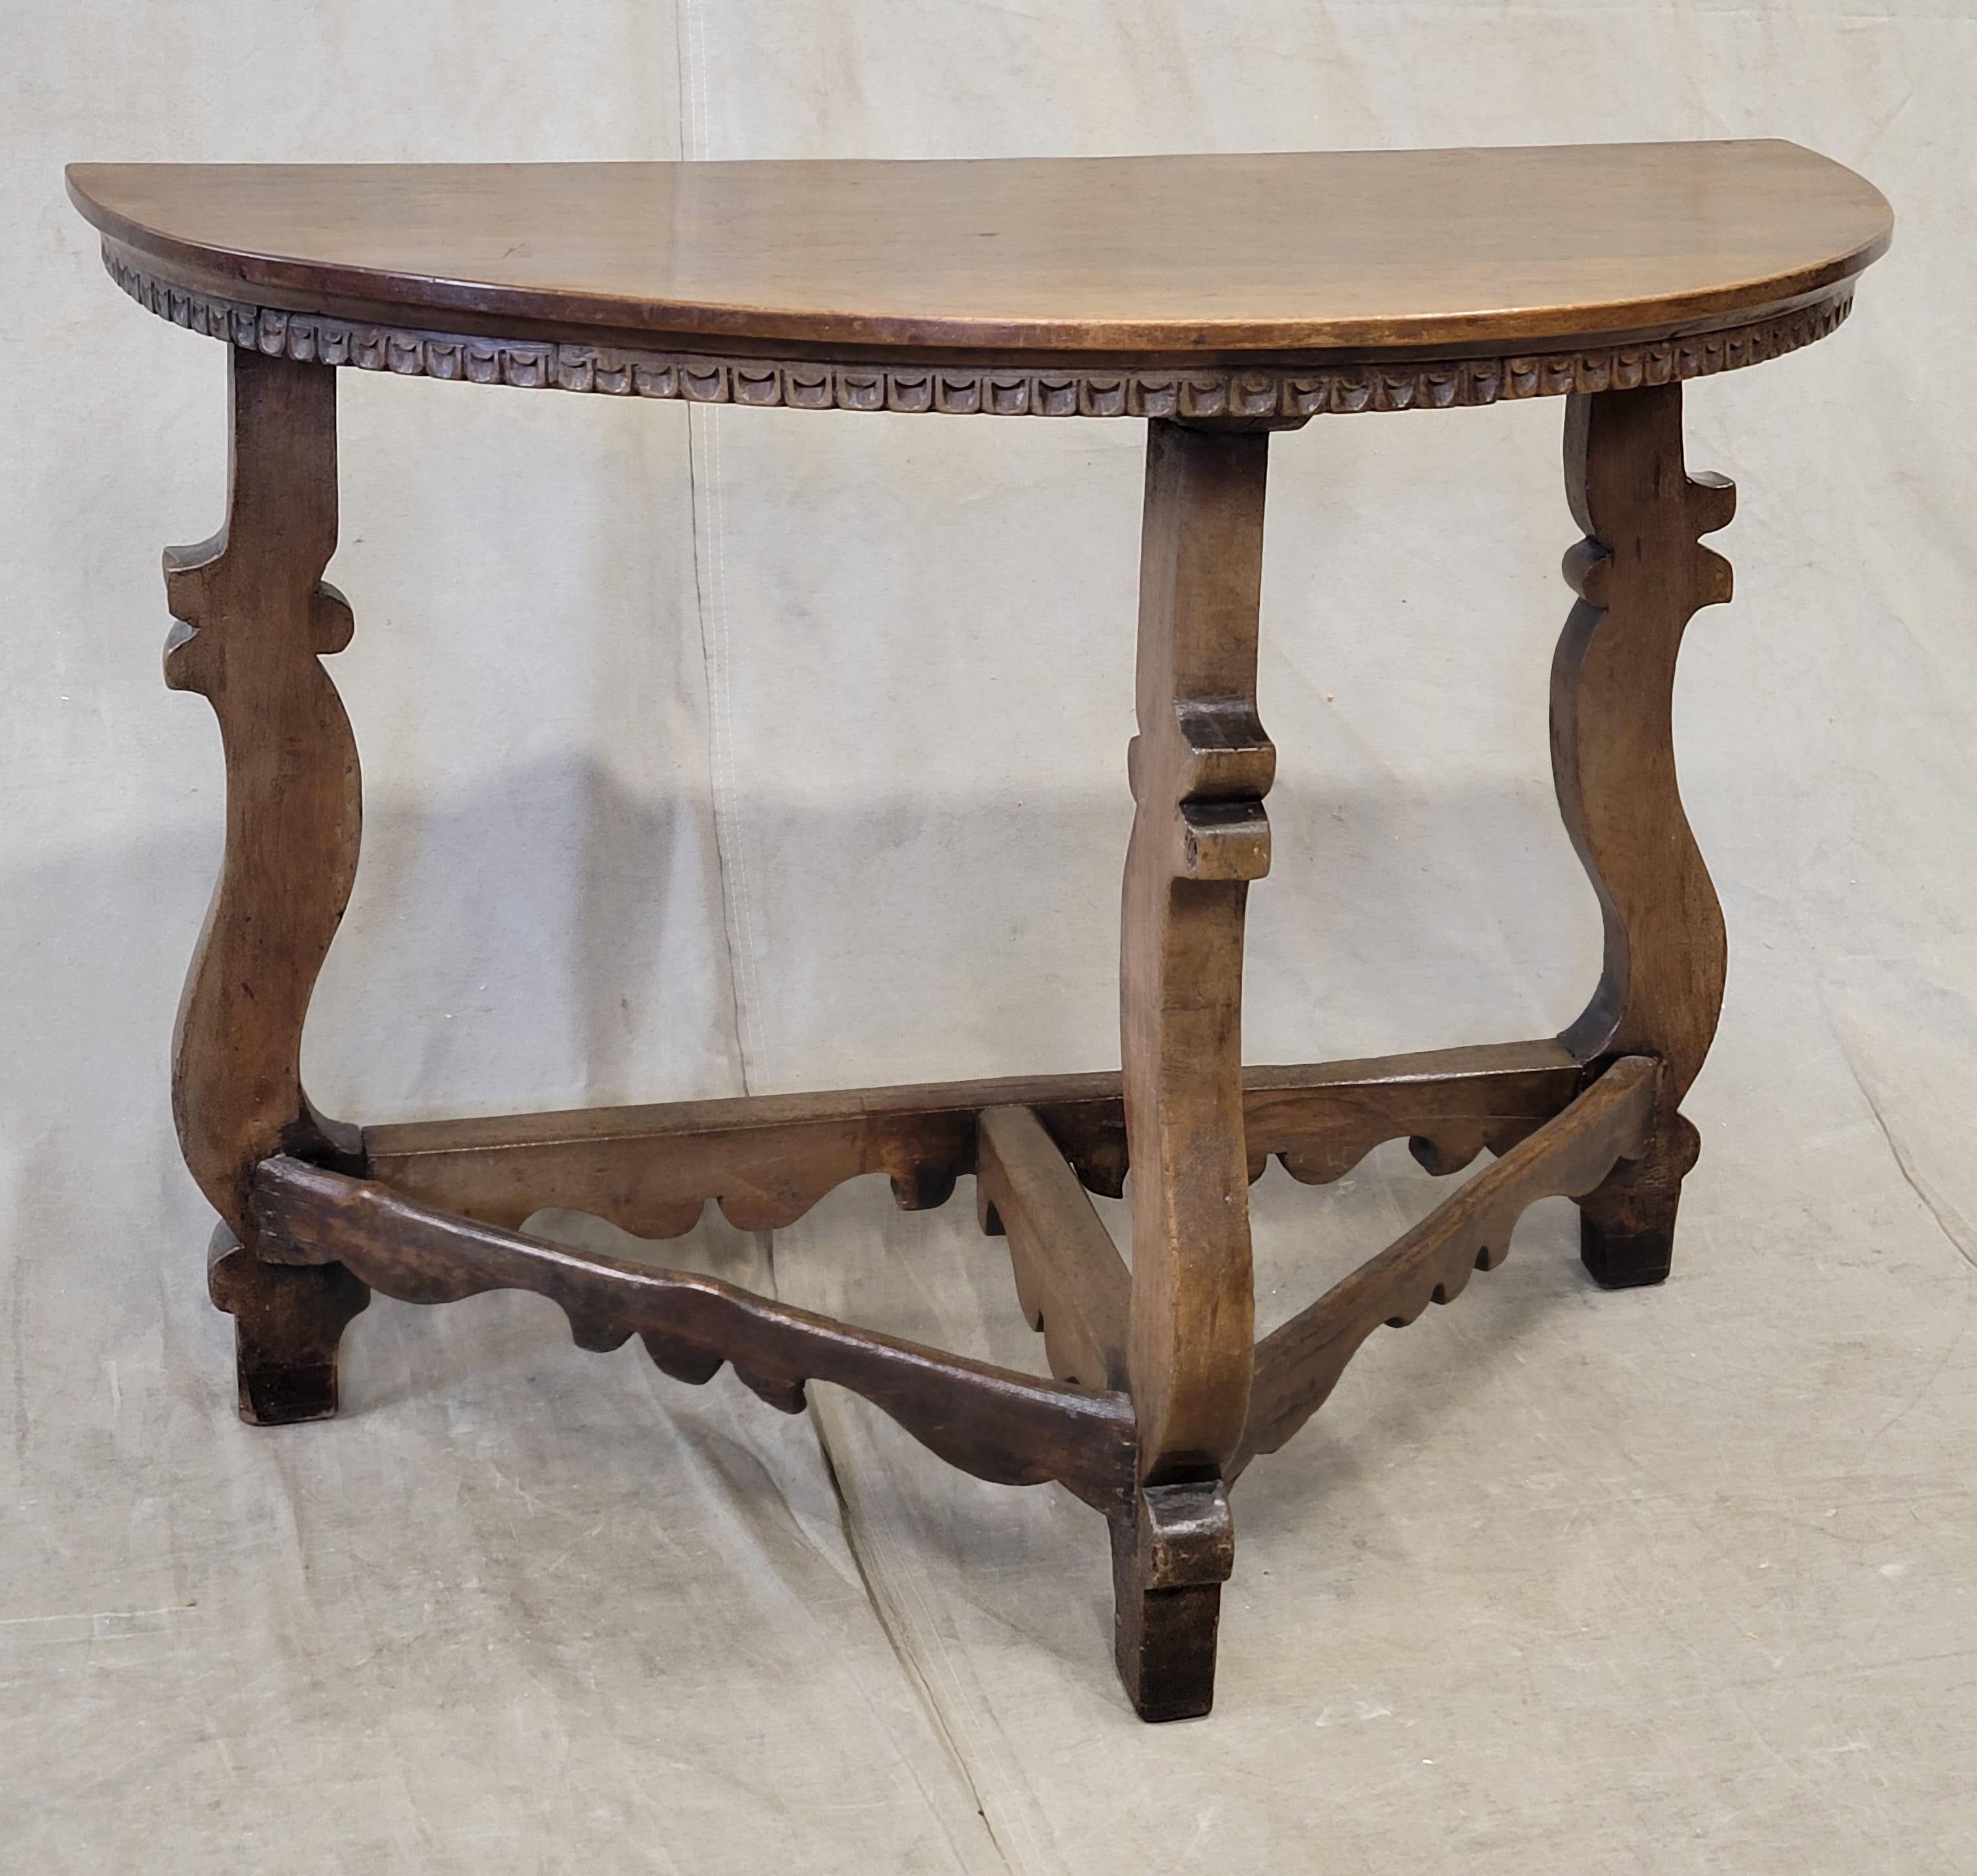 A gorgeous antique Italian baroque revival walnut demi-lune console table. Notice the carved scalloped edge on the table top and the curvilinear carved legs and stretchers. Perfect in a hall, entryway or anywhere that space is at a premium. This